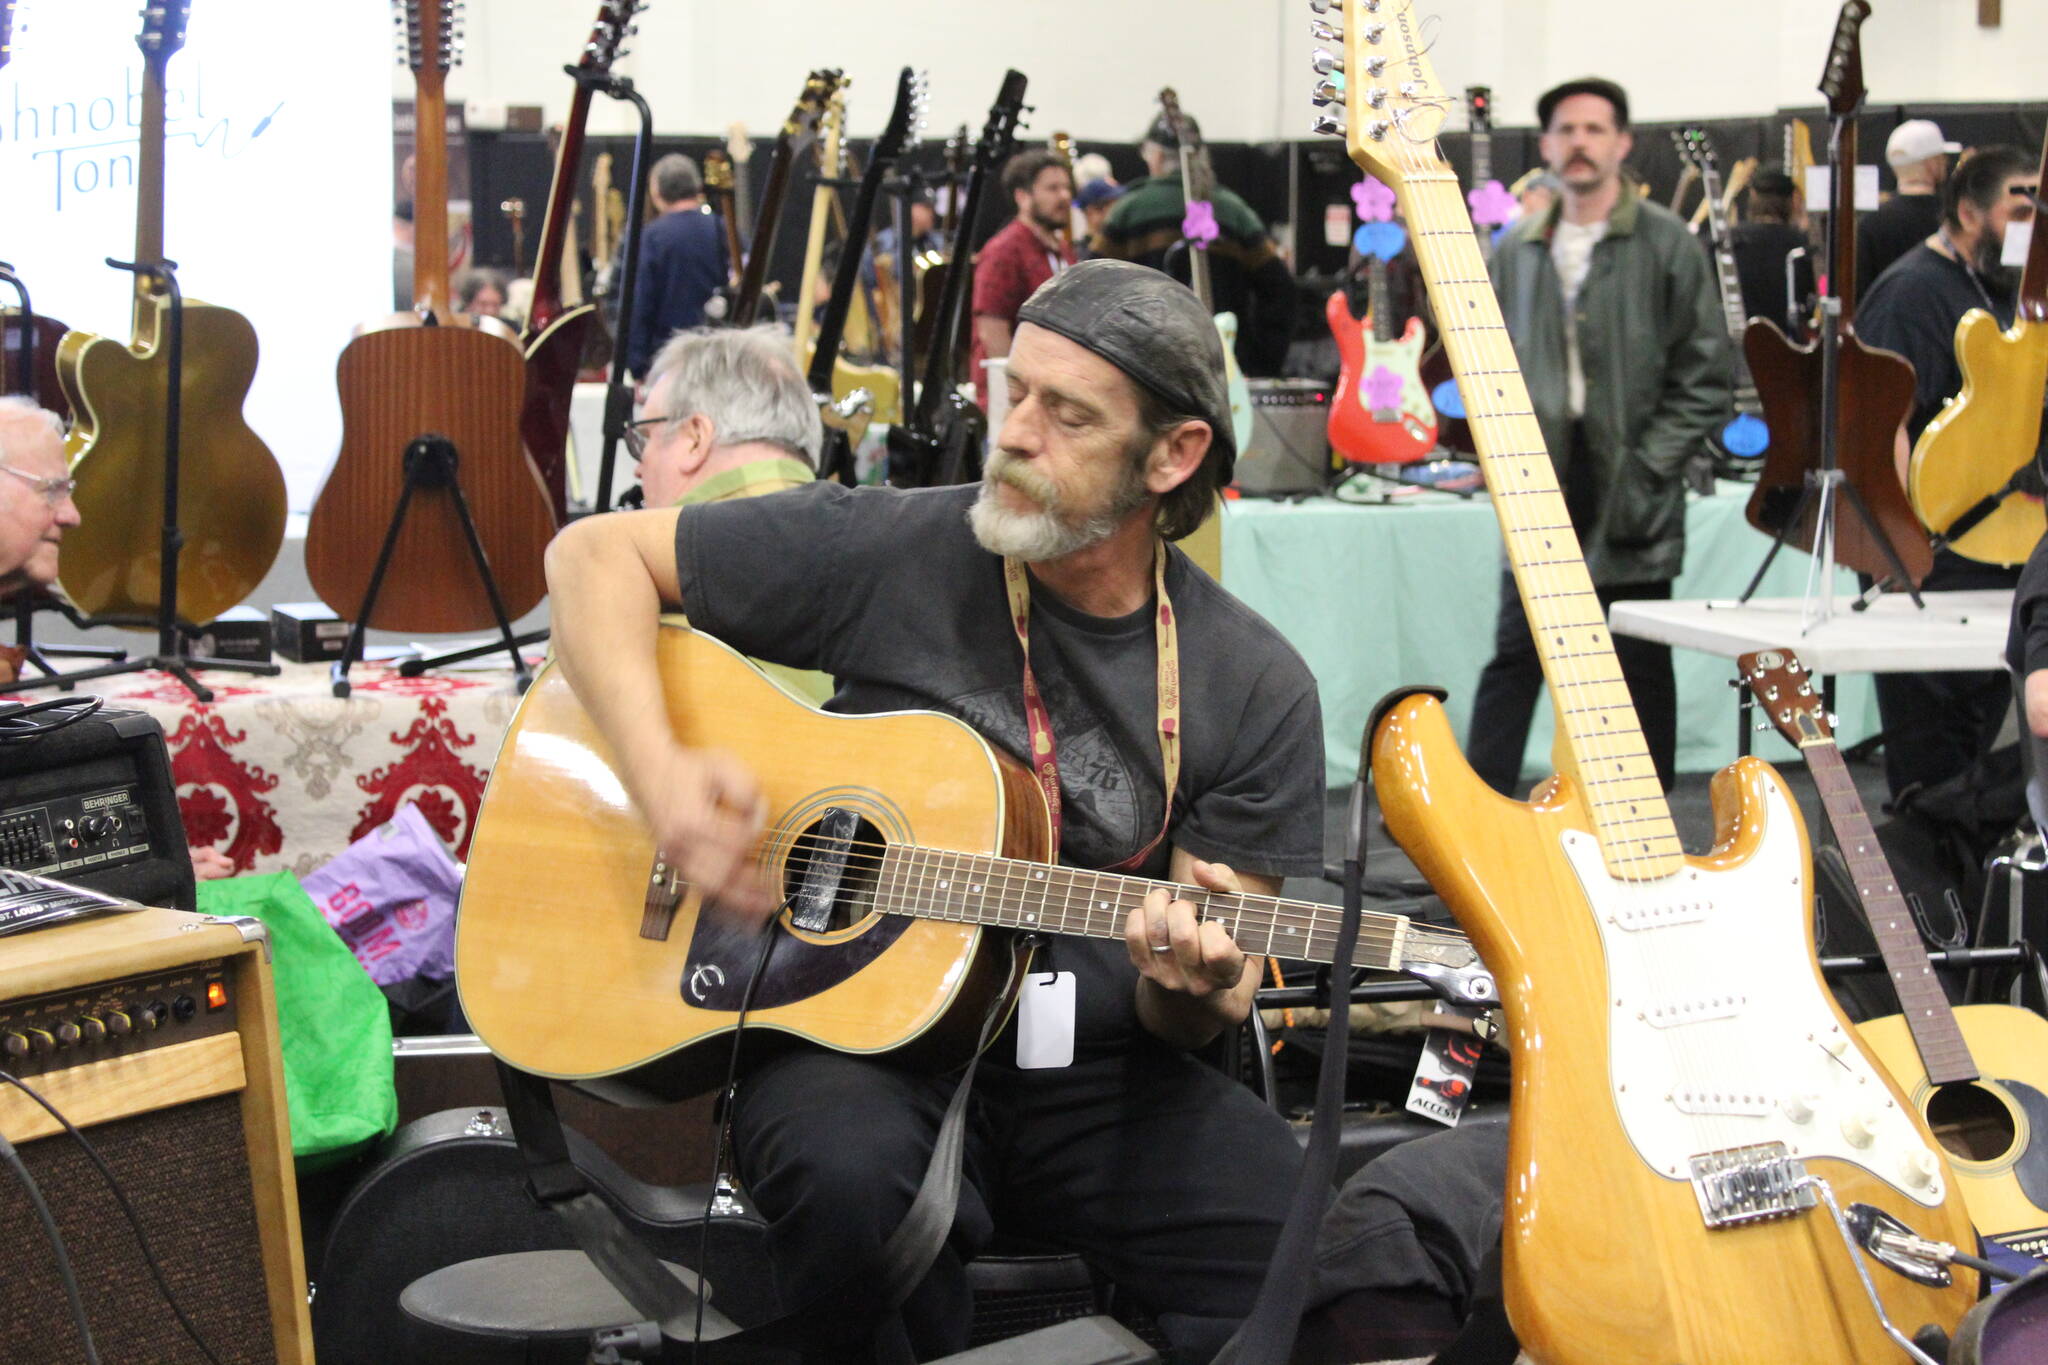 One vendor takes a break to play some music. Photo by Bailey Jo Josie/Sound Publishing